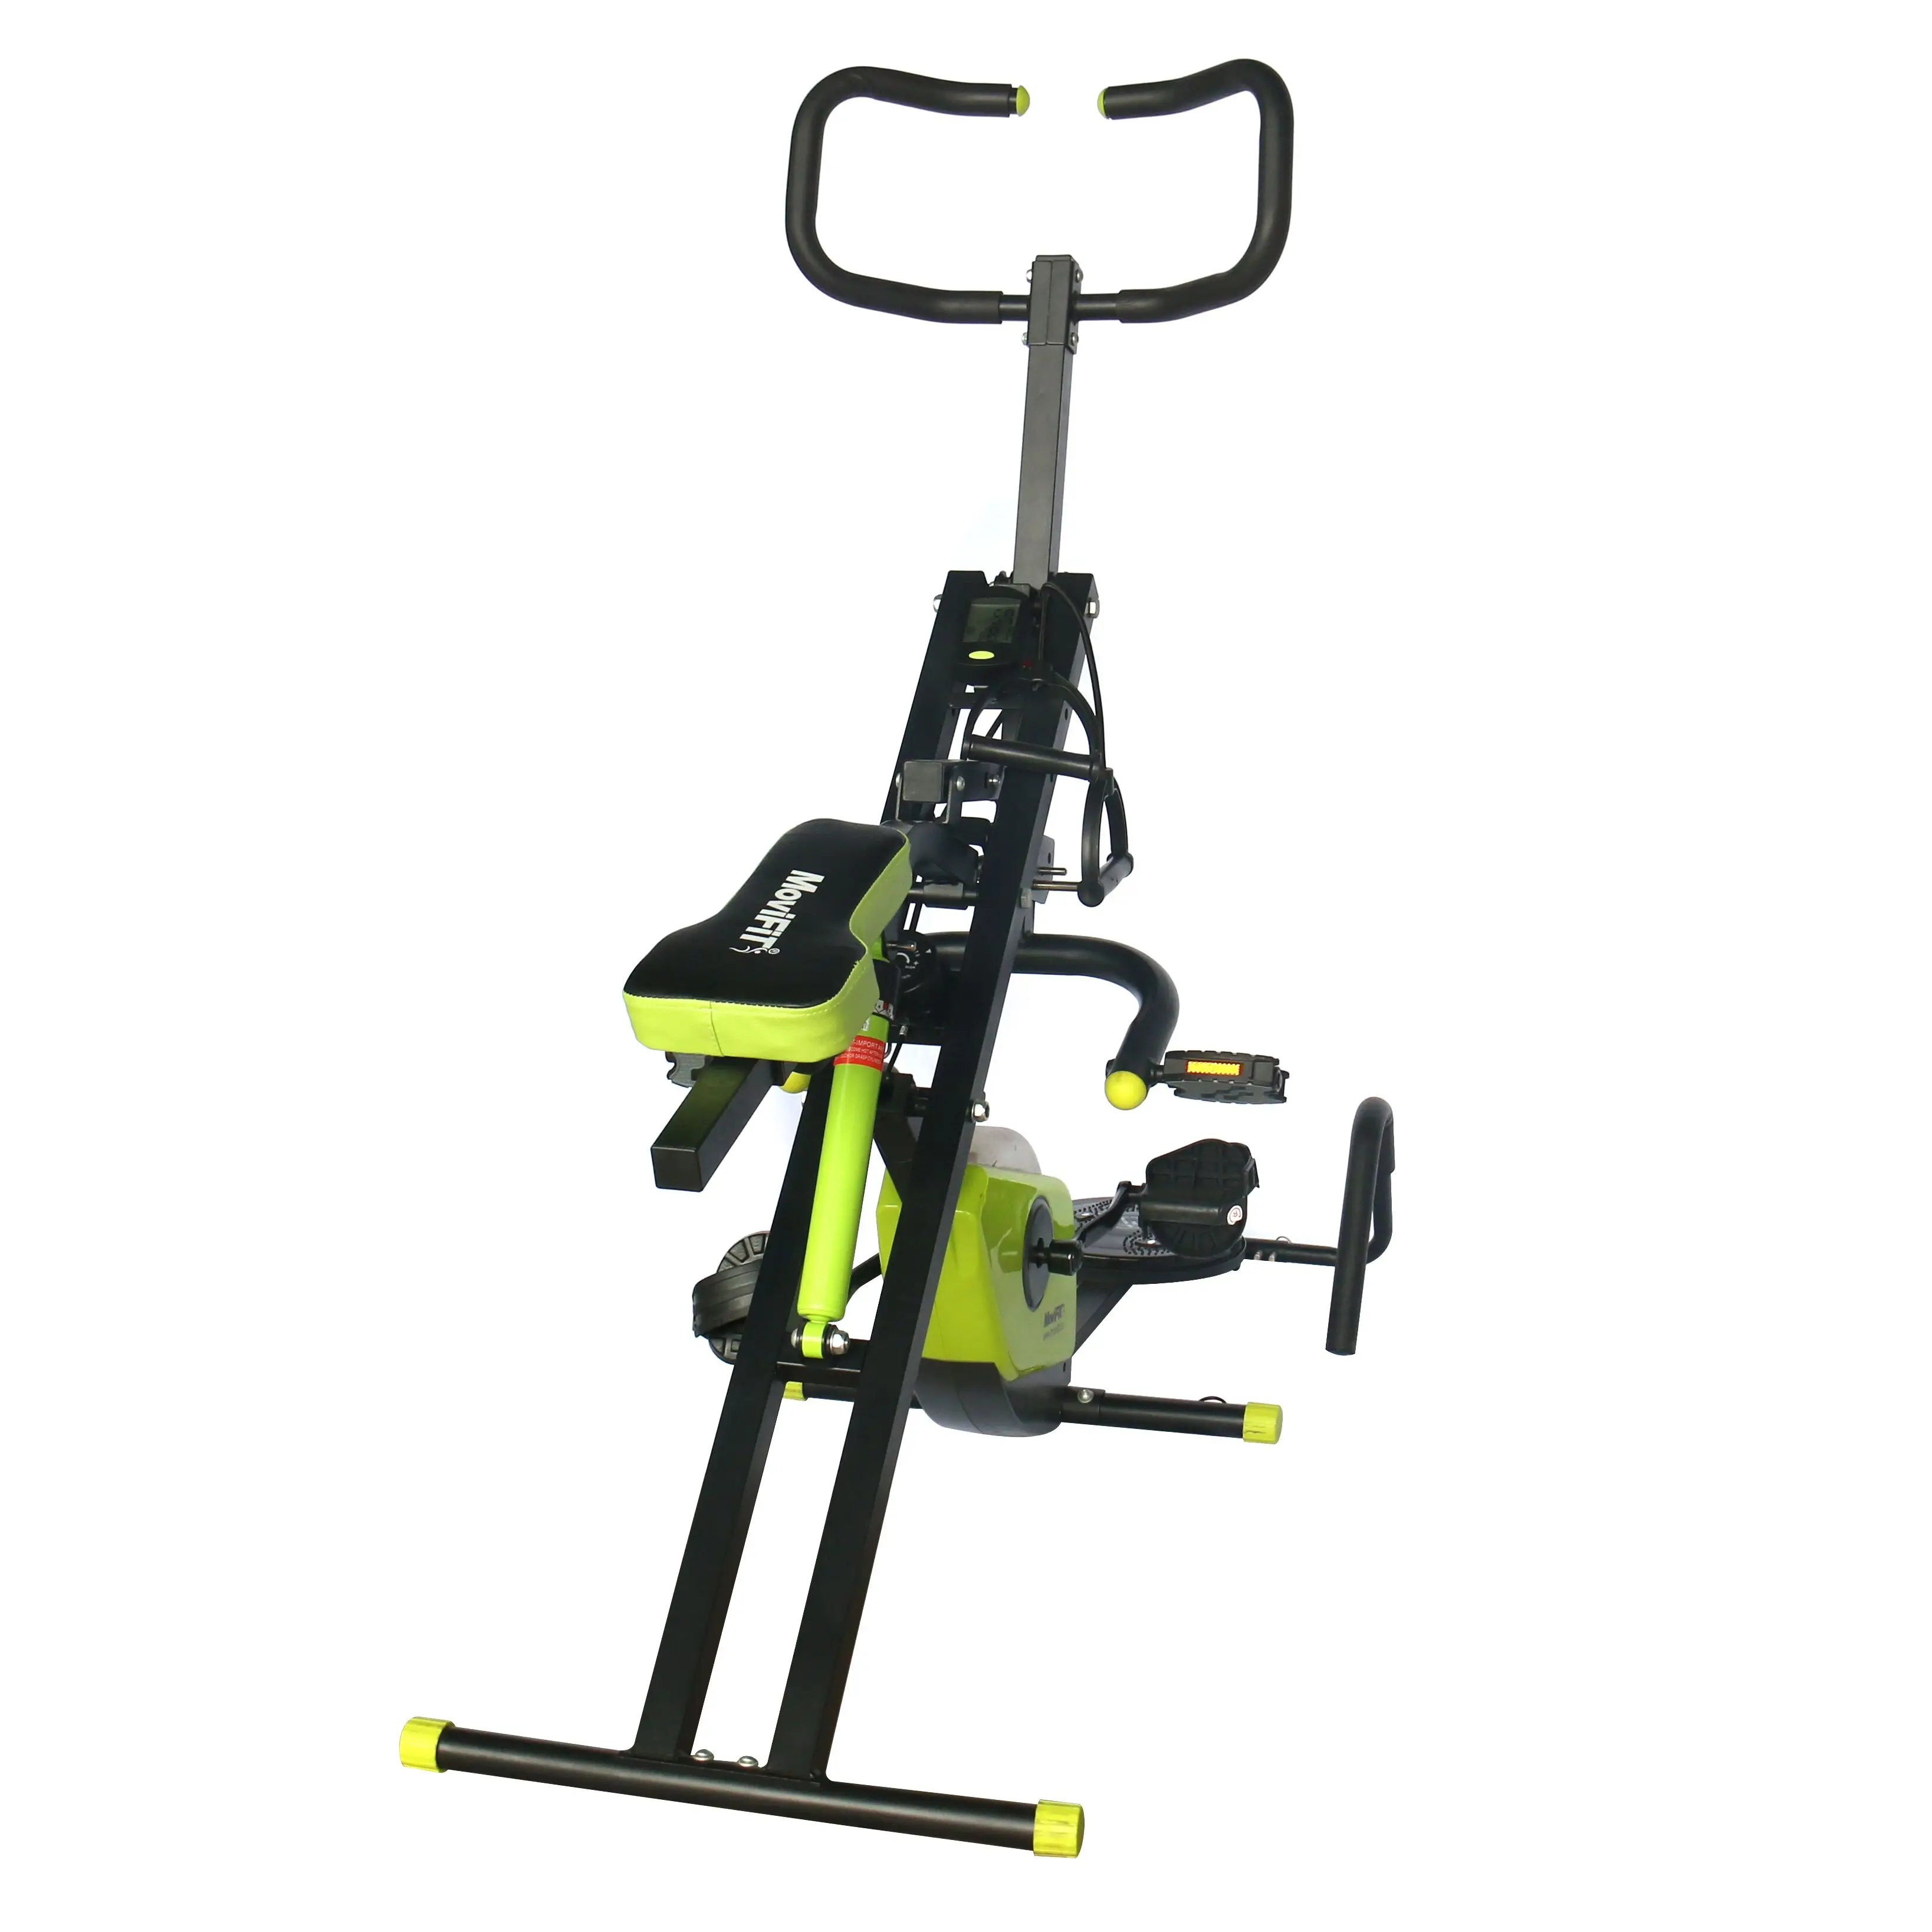 Total Crunch con Twister Workout Fitness Exercise Muscle and Cardio Trainer